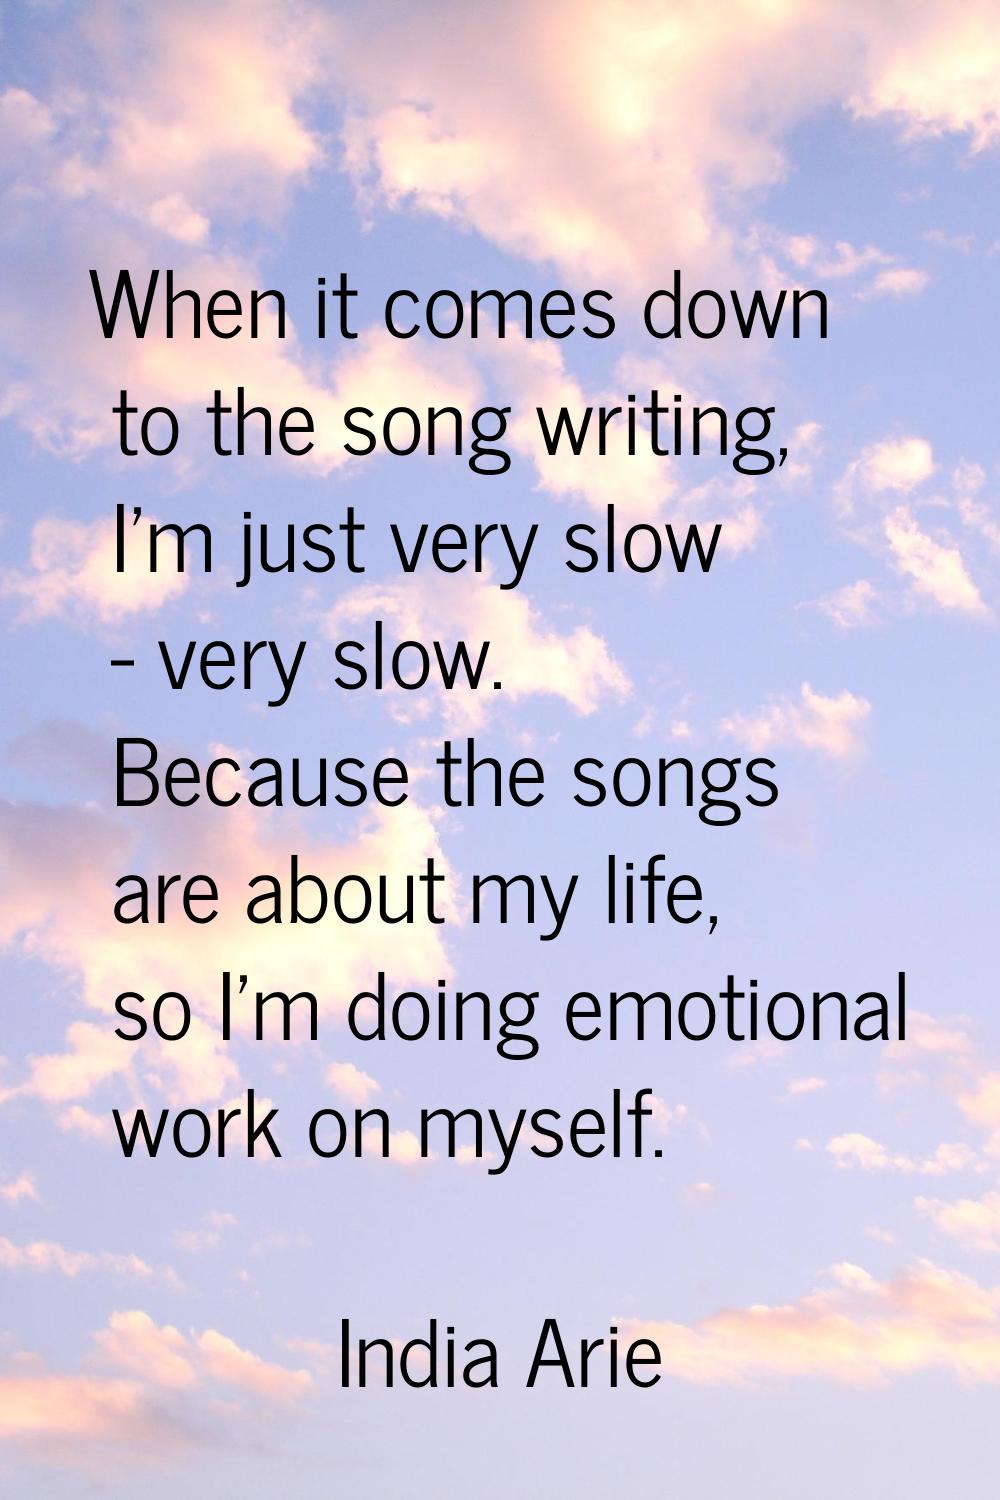 When it comes down to the song writing, I'm just very slow - very slow. Because the songs are about